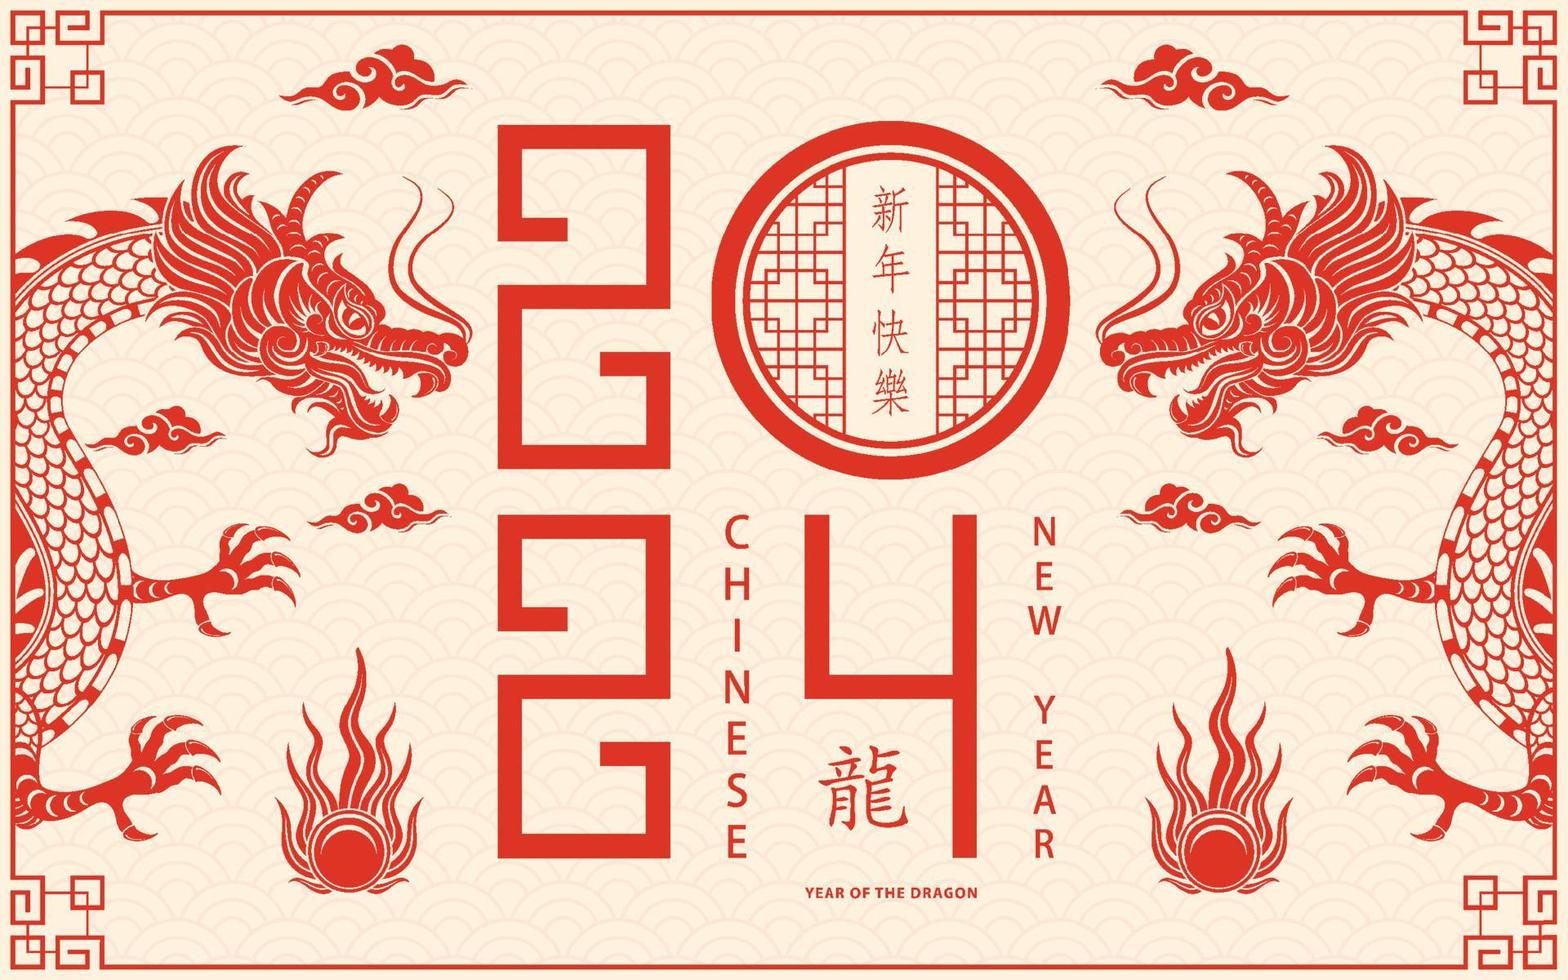 Happy Chinese new year 2024 Dragon Zodiac sign vector